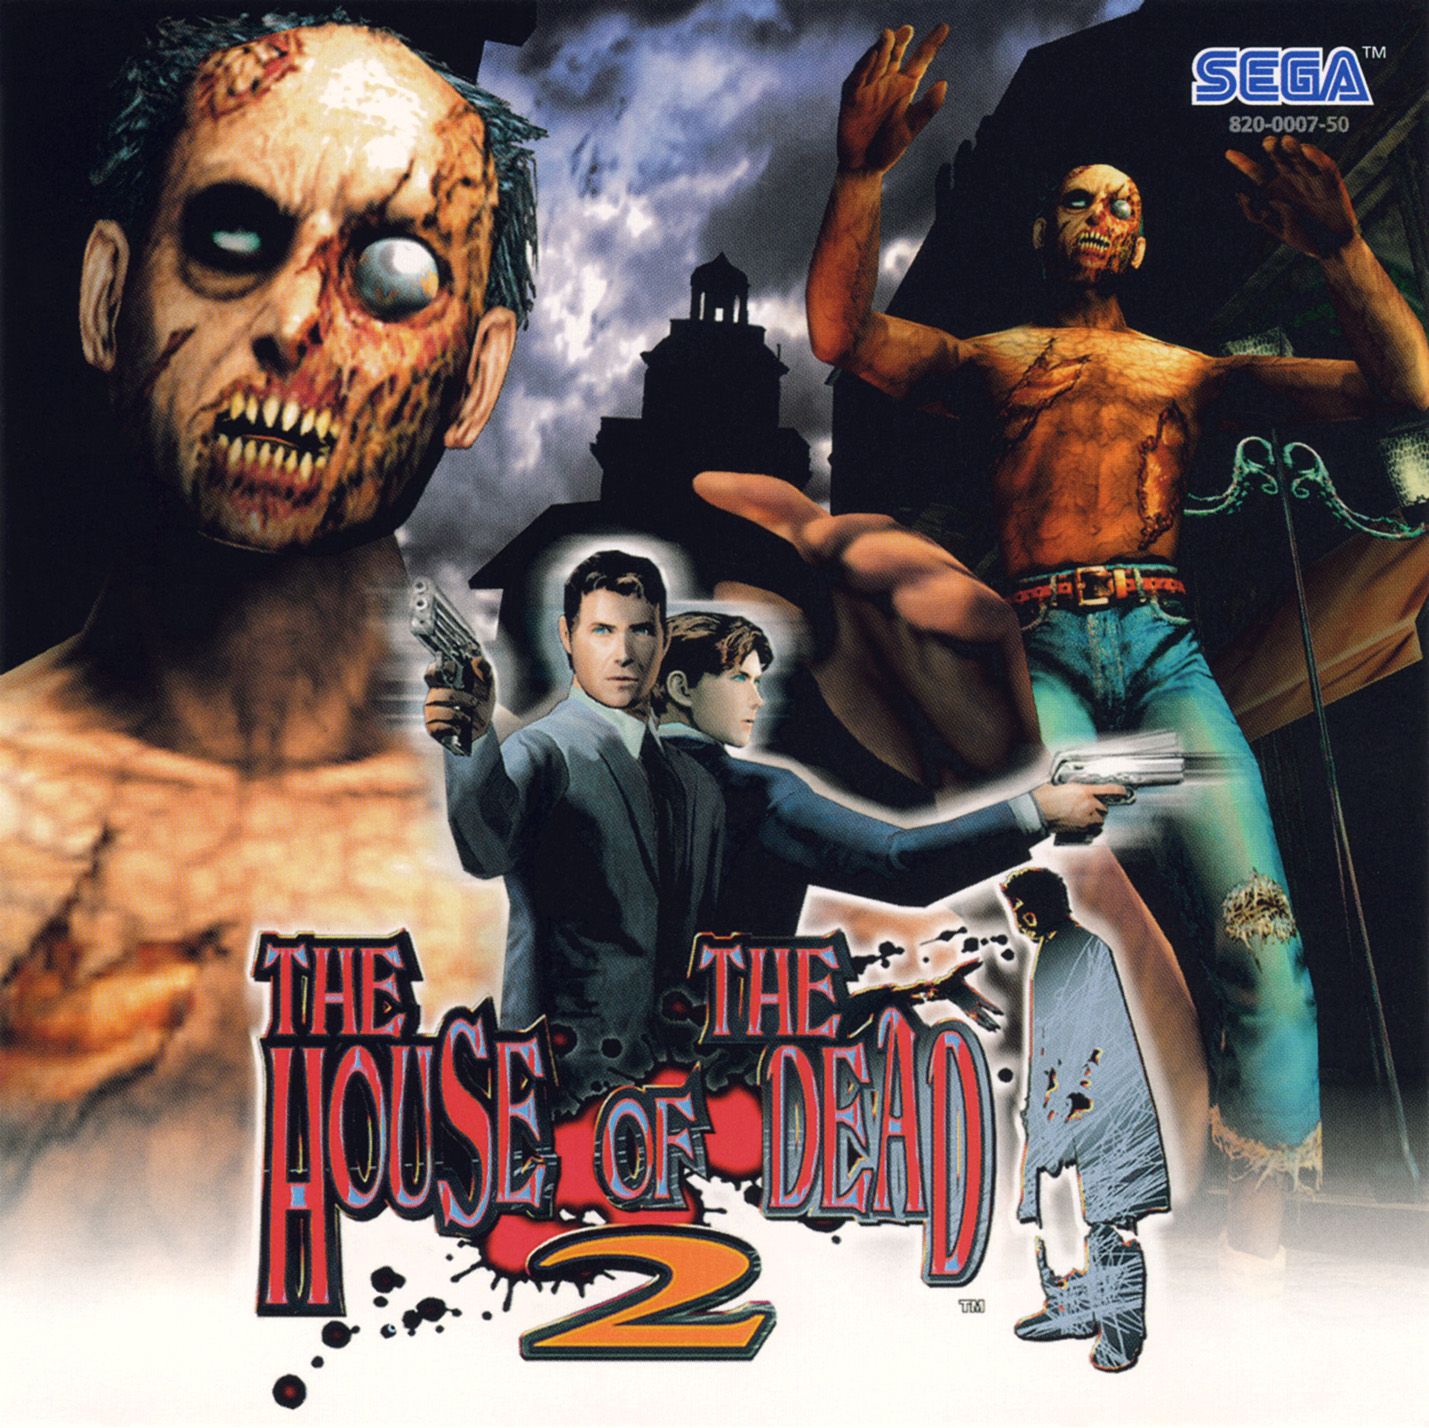 The house of the dead 2 download free - profitstiklo